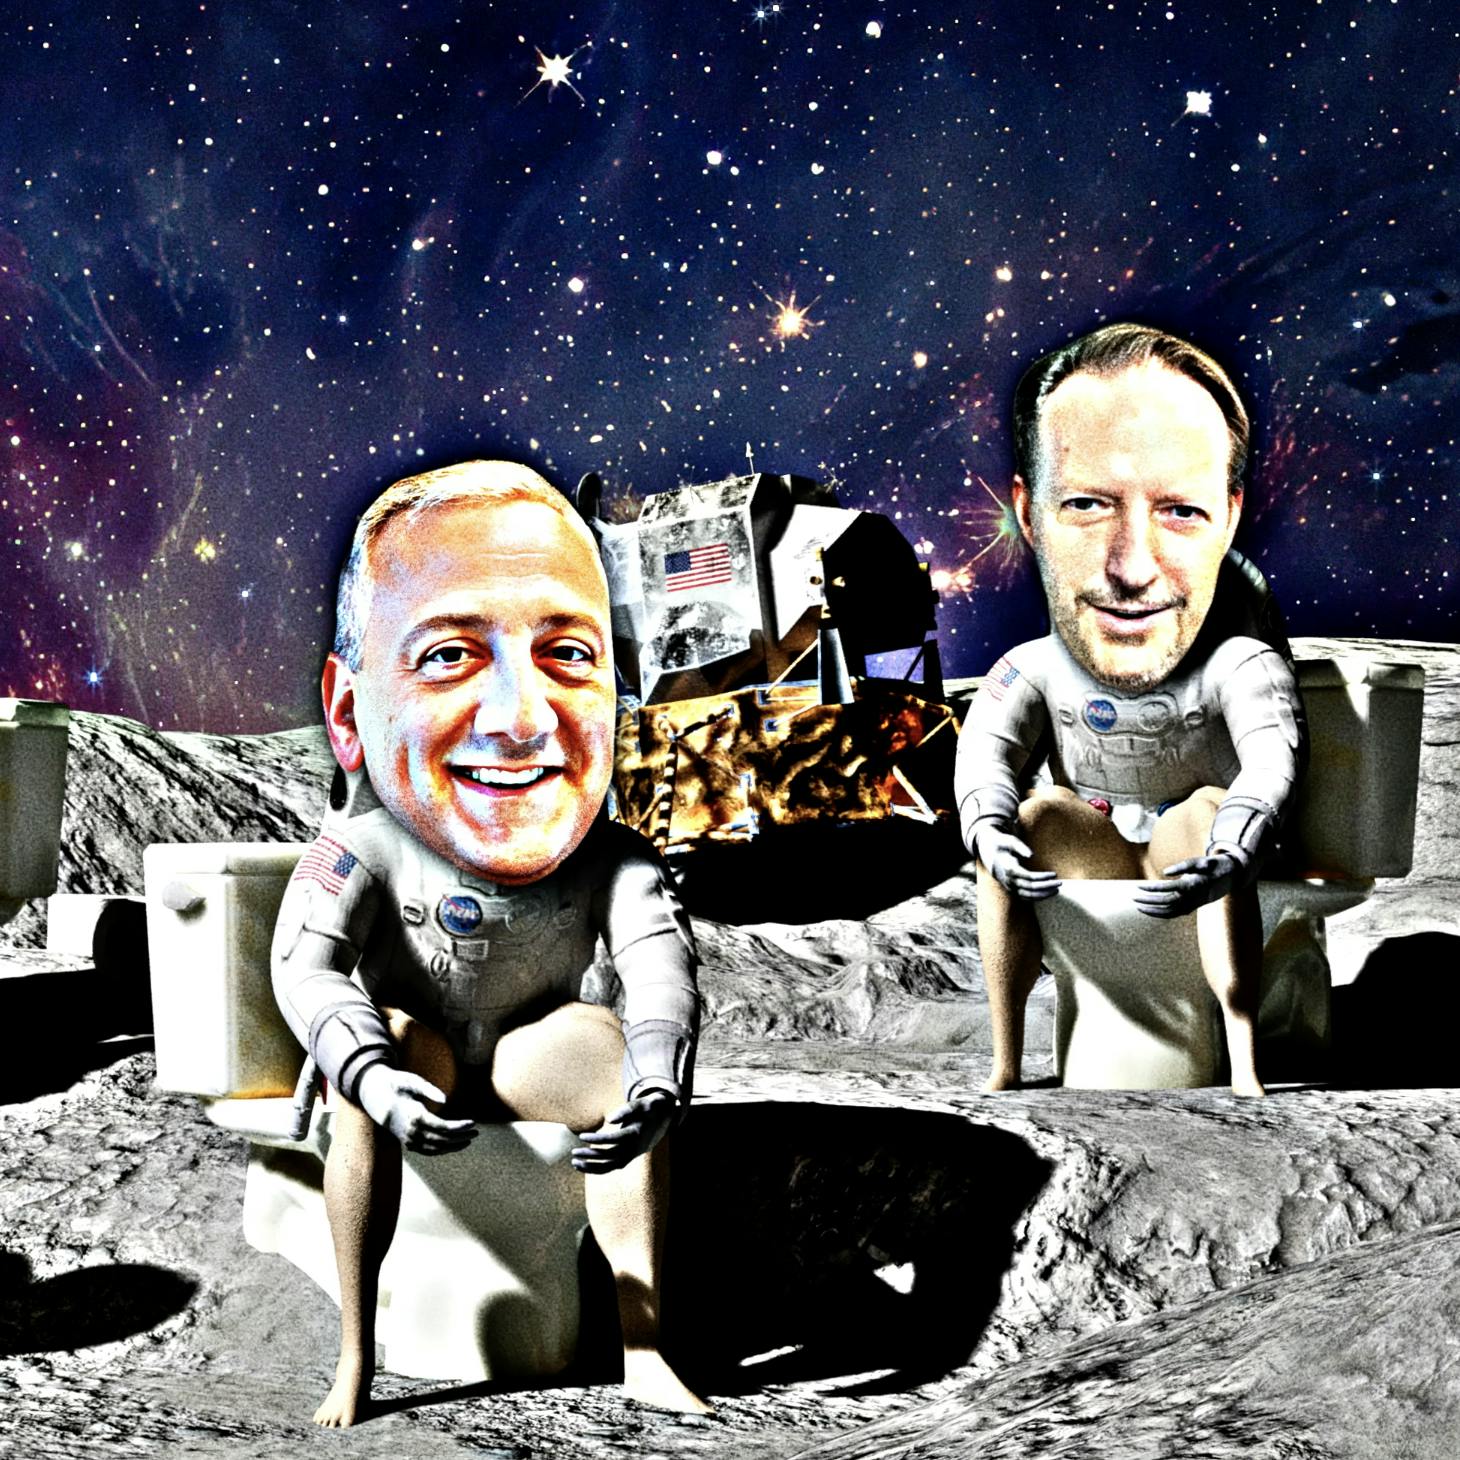 Mooning with Mike Massimino